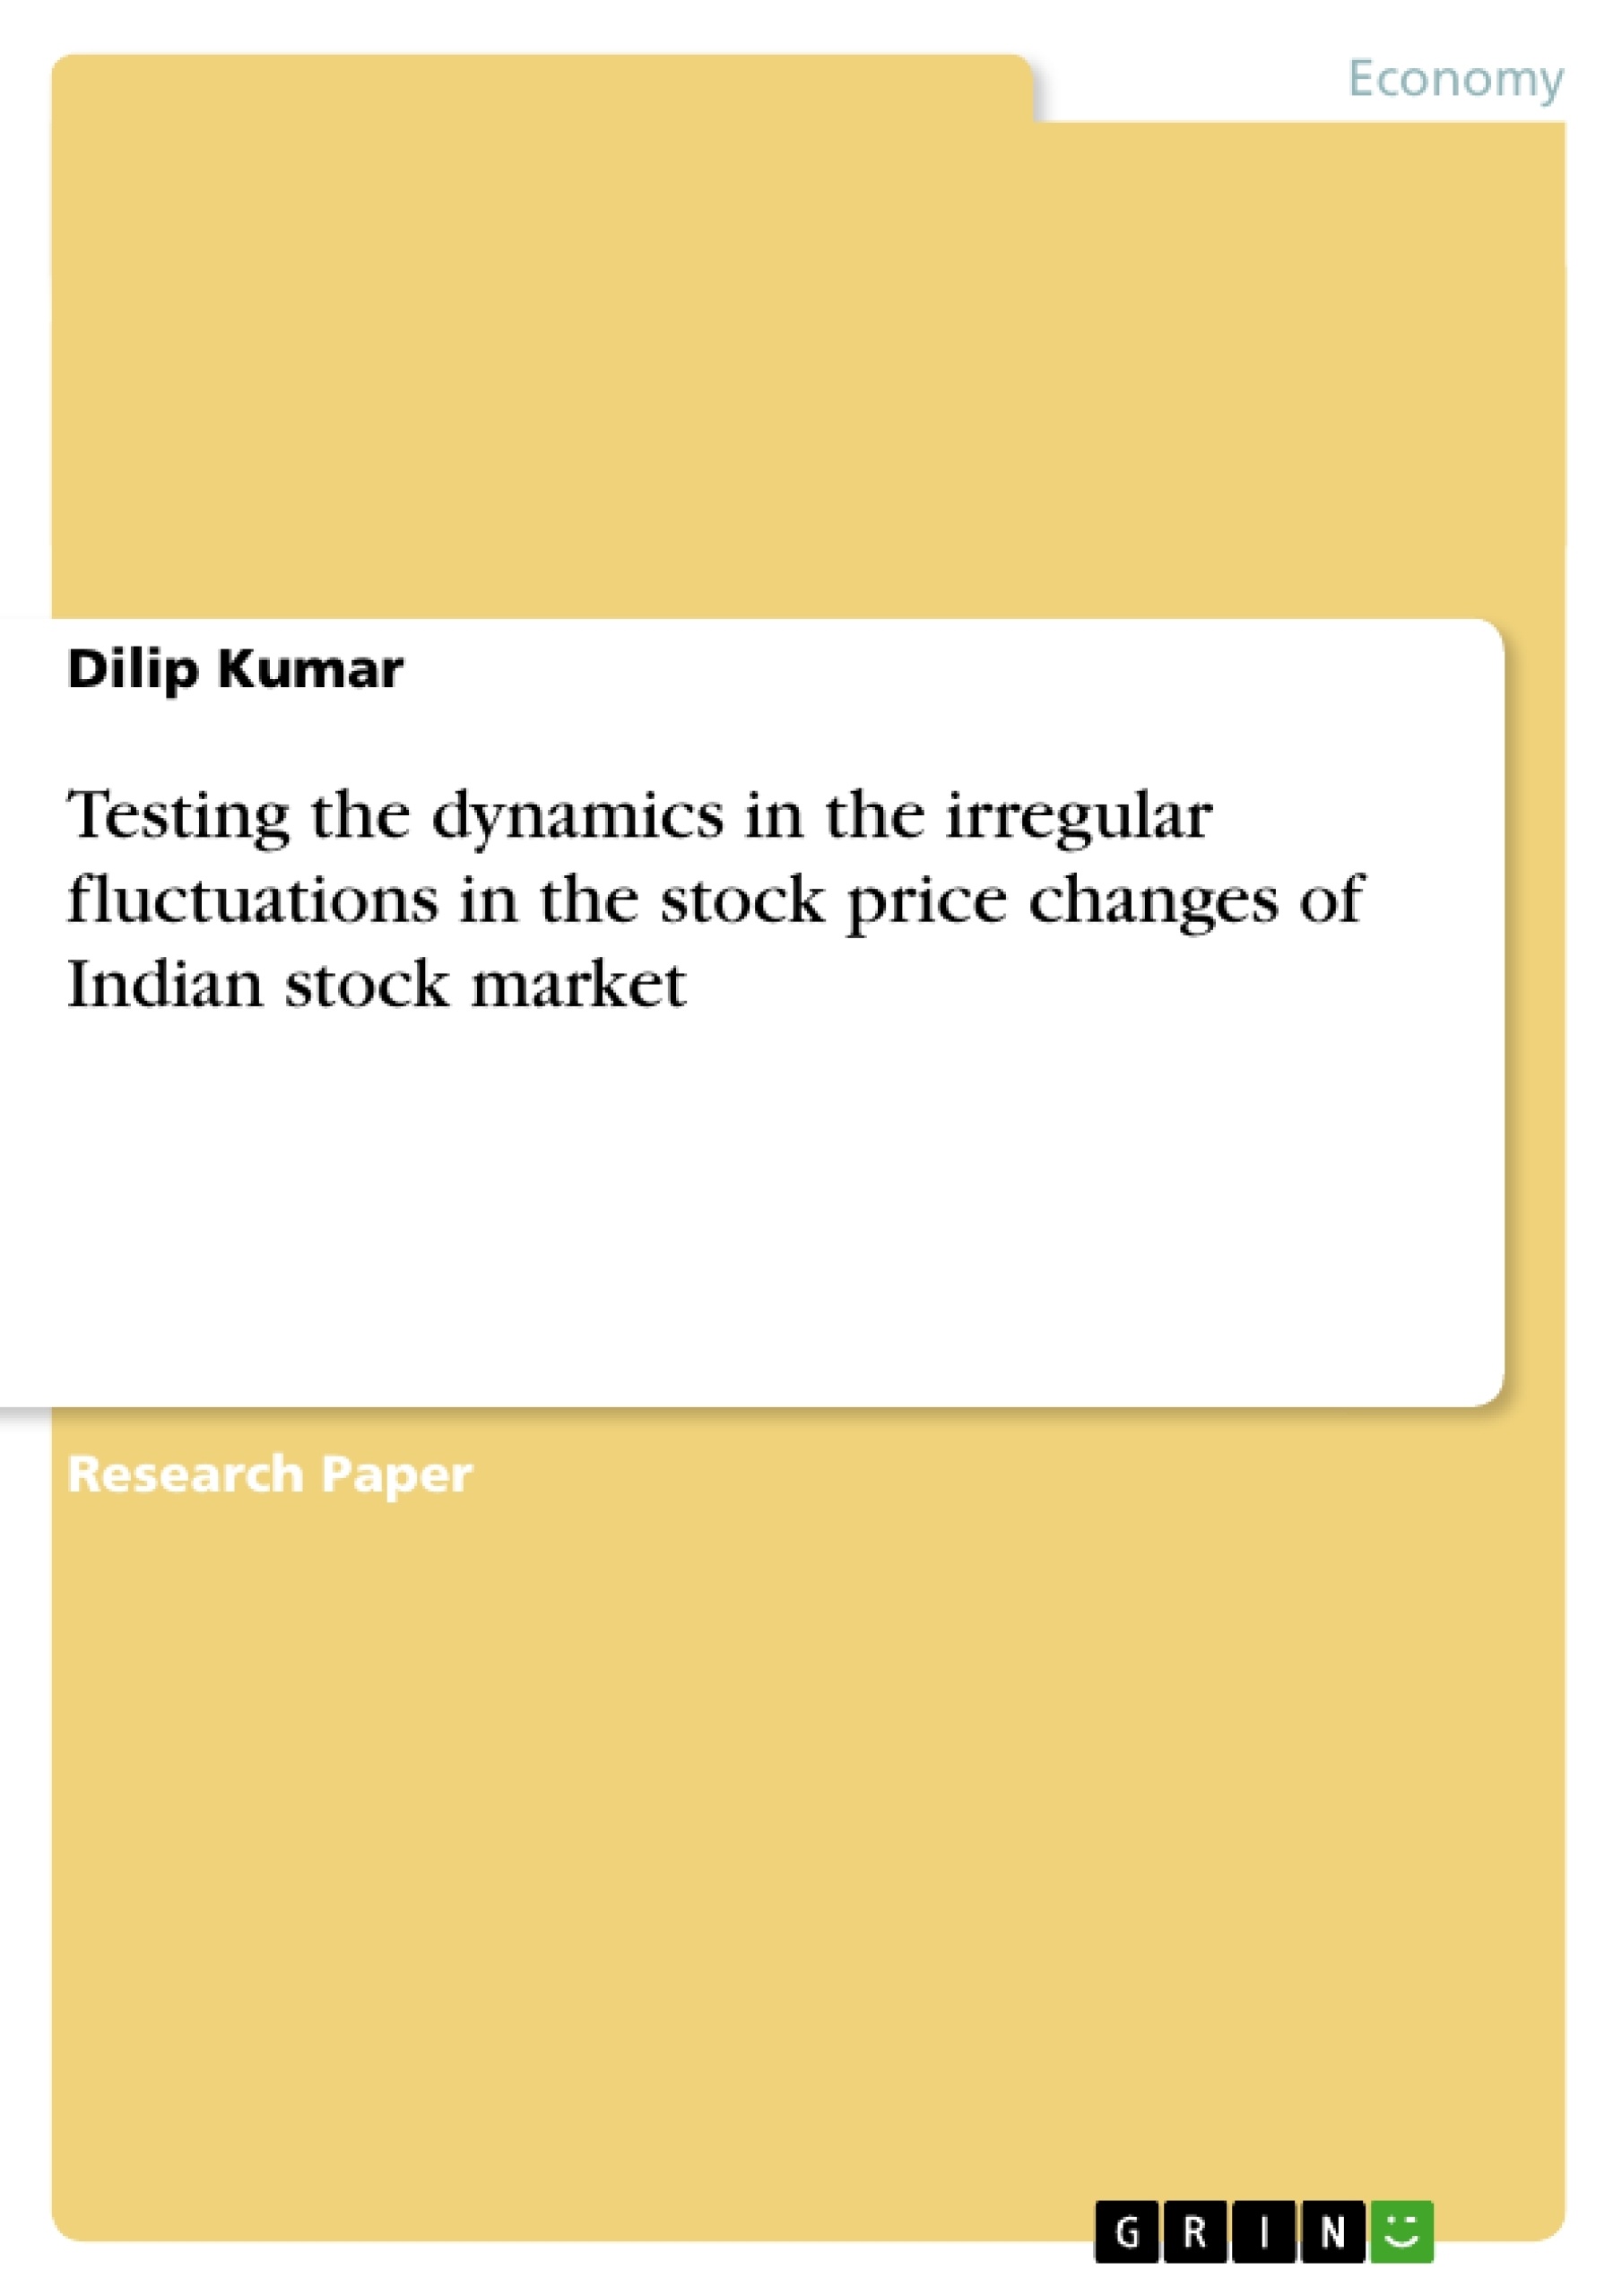 Titre: Testing the dynamics in the irregular fluctuations in the stock price changes of Indian stock market